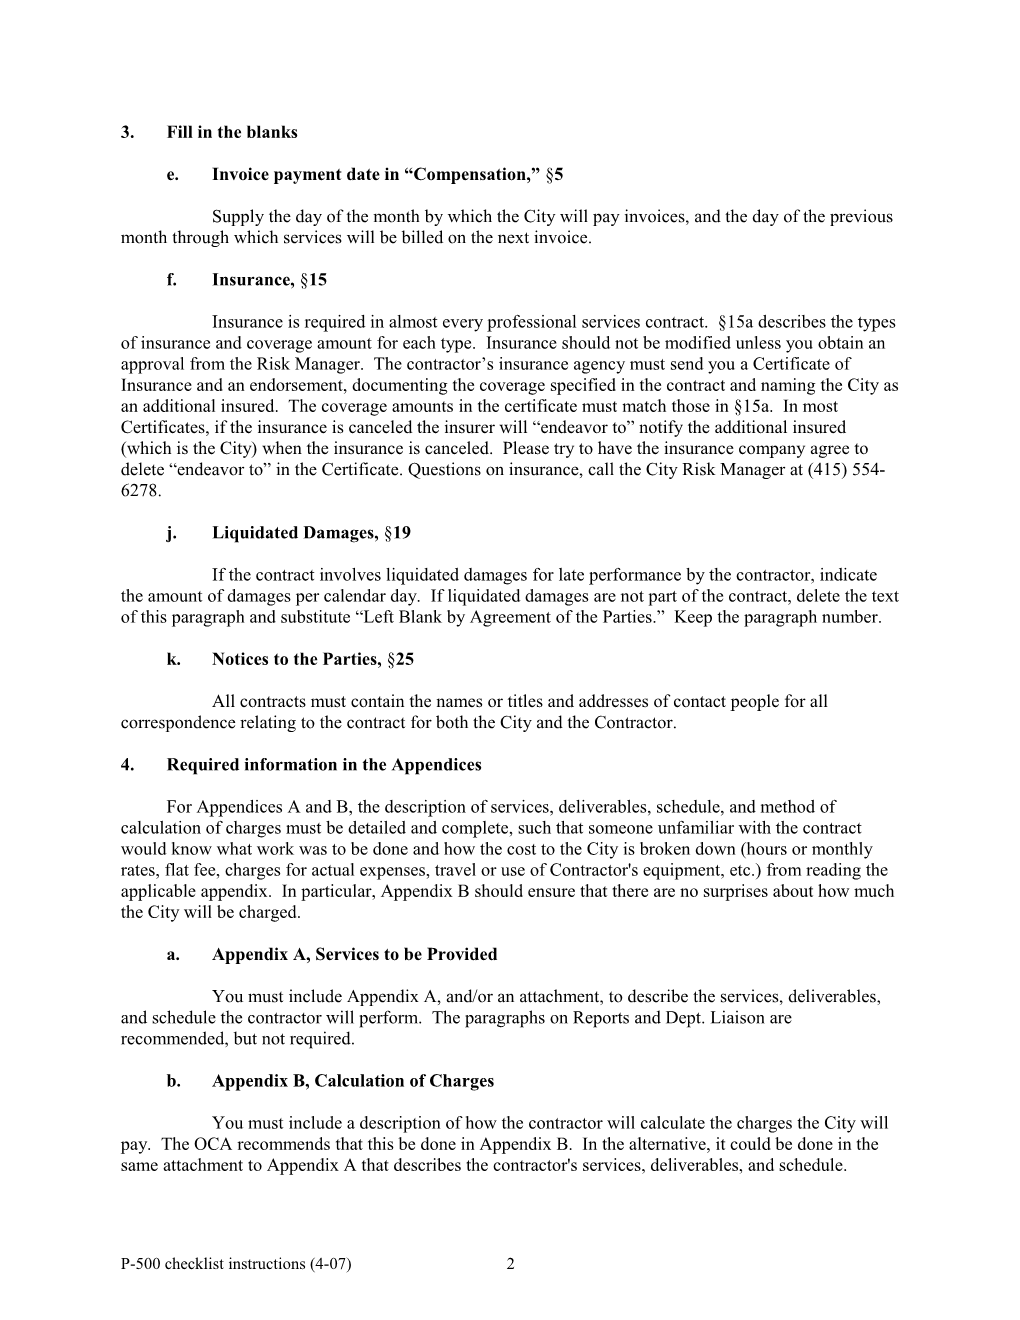 Instructions to Professional Services Contract (P-500) Checklist and Transmittal Sheet